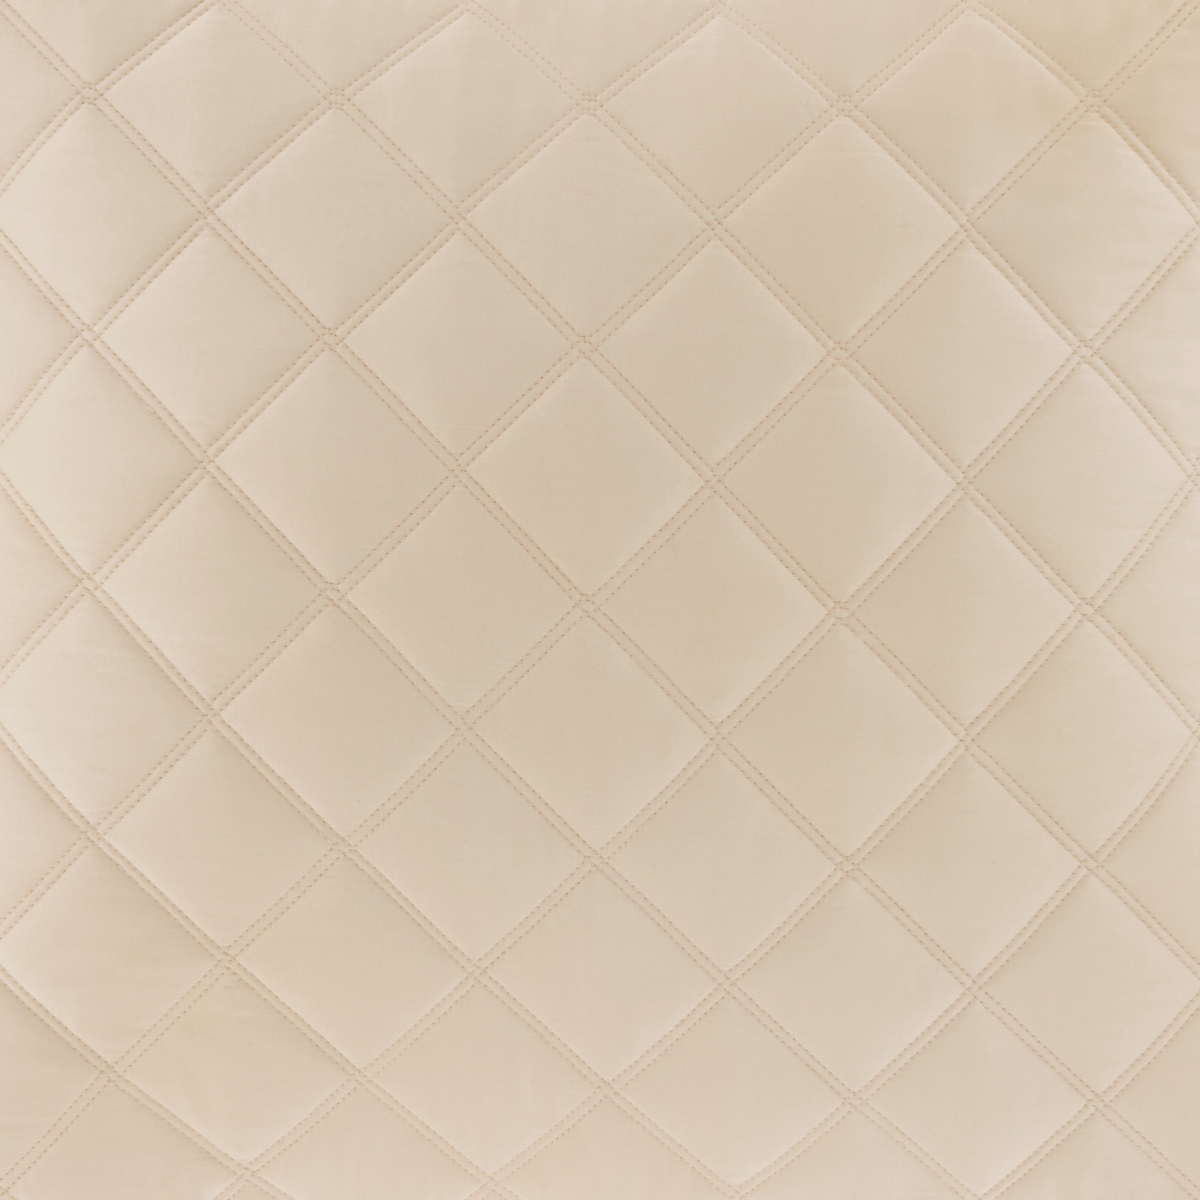 Swatch Sample of Pine Cone Hill Quilted Silken Solid Coverlet &amp; Shams in Sand Color